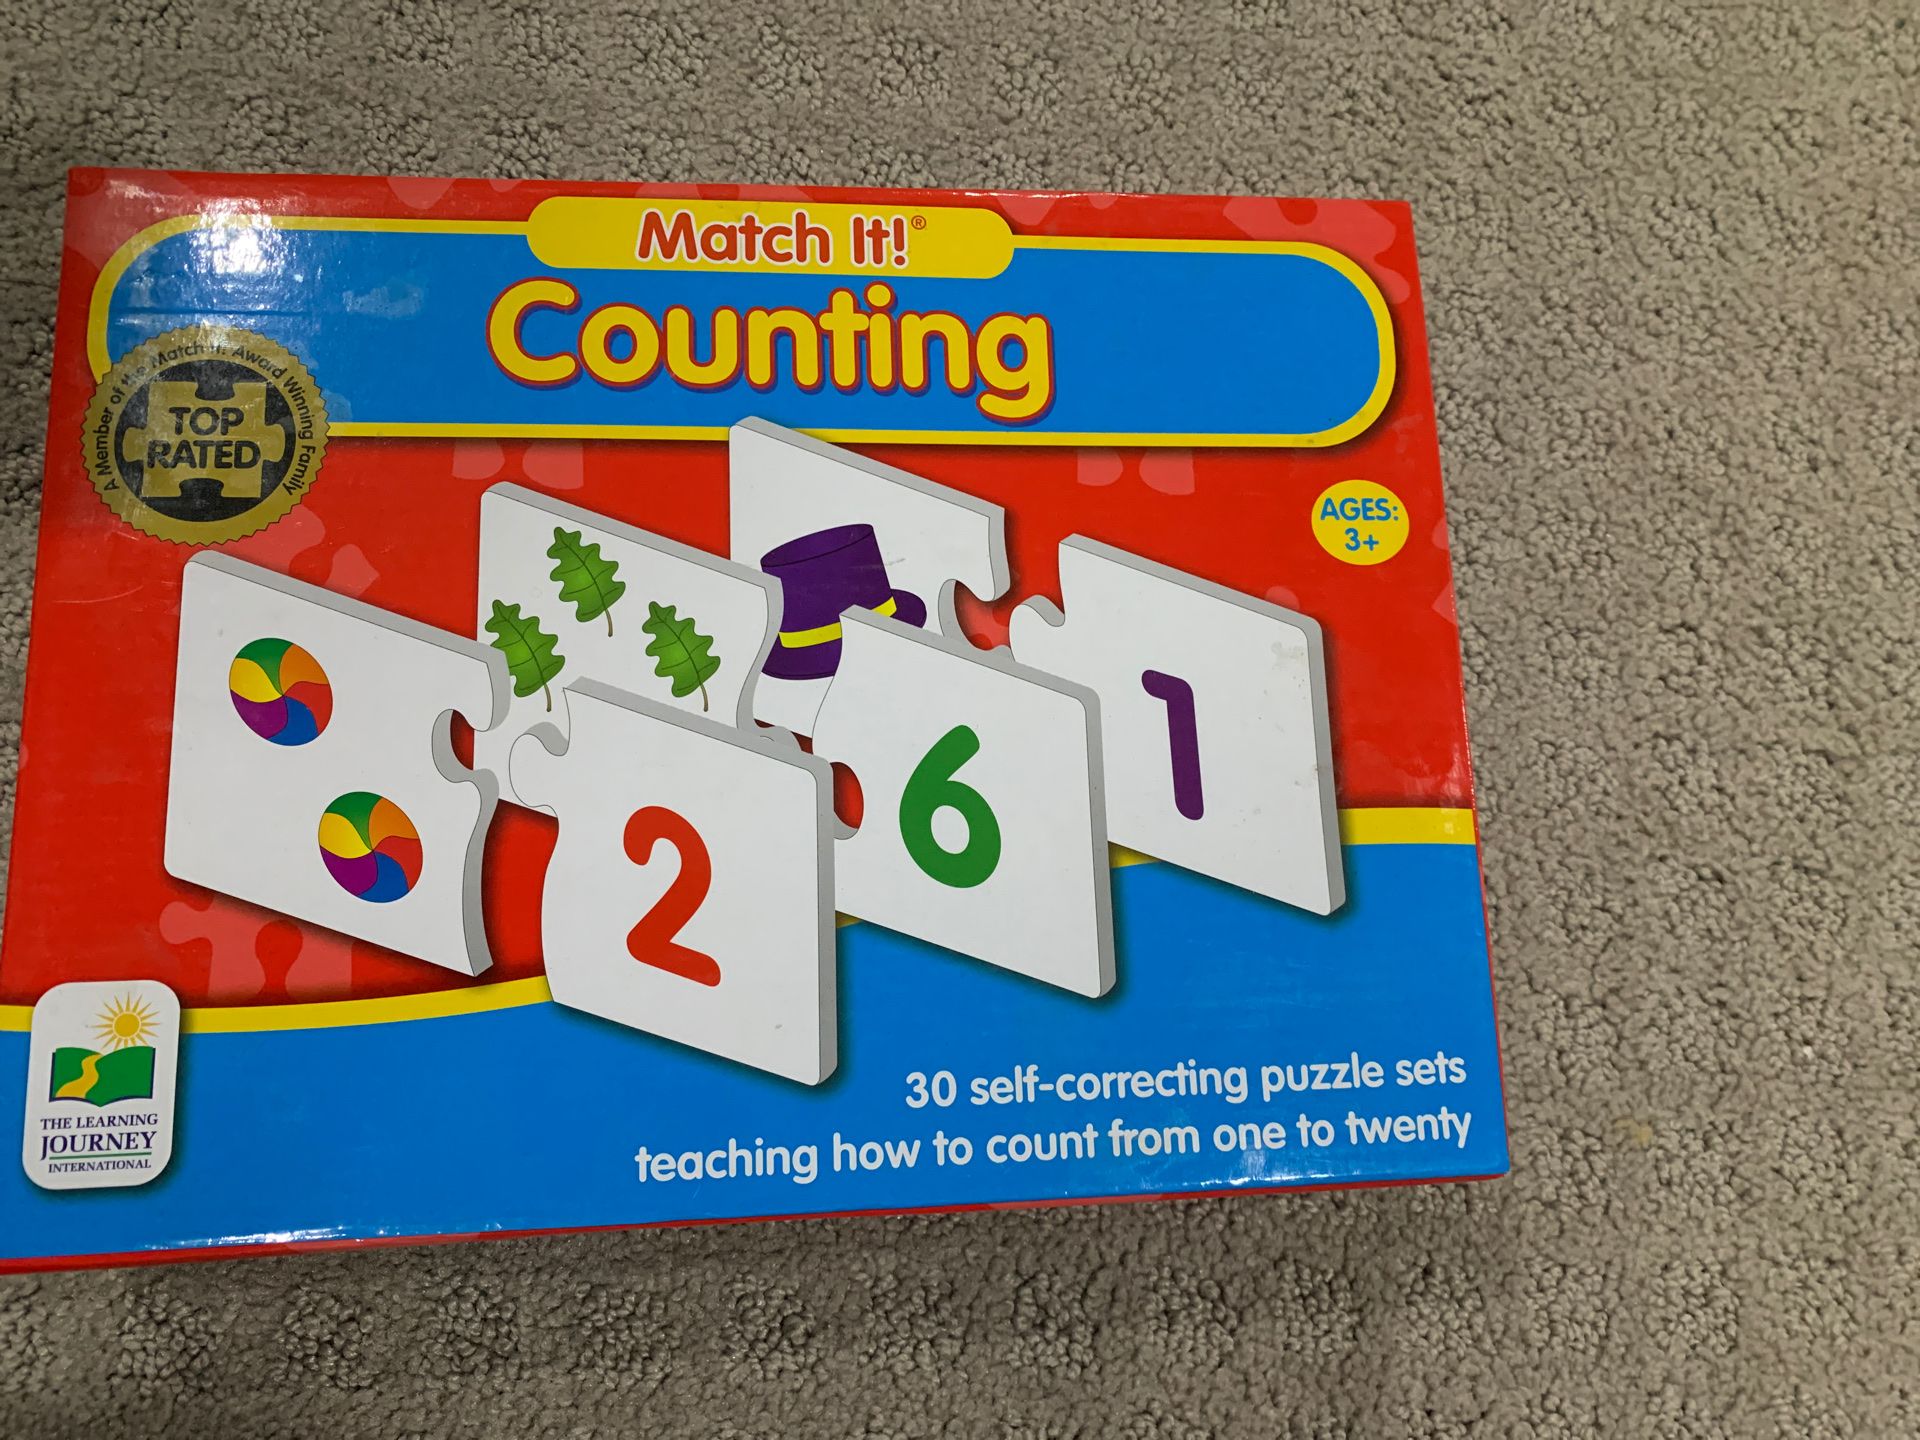 Matching counting game for kids